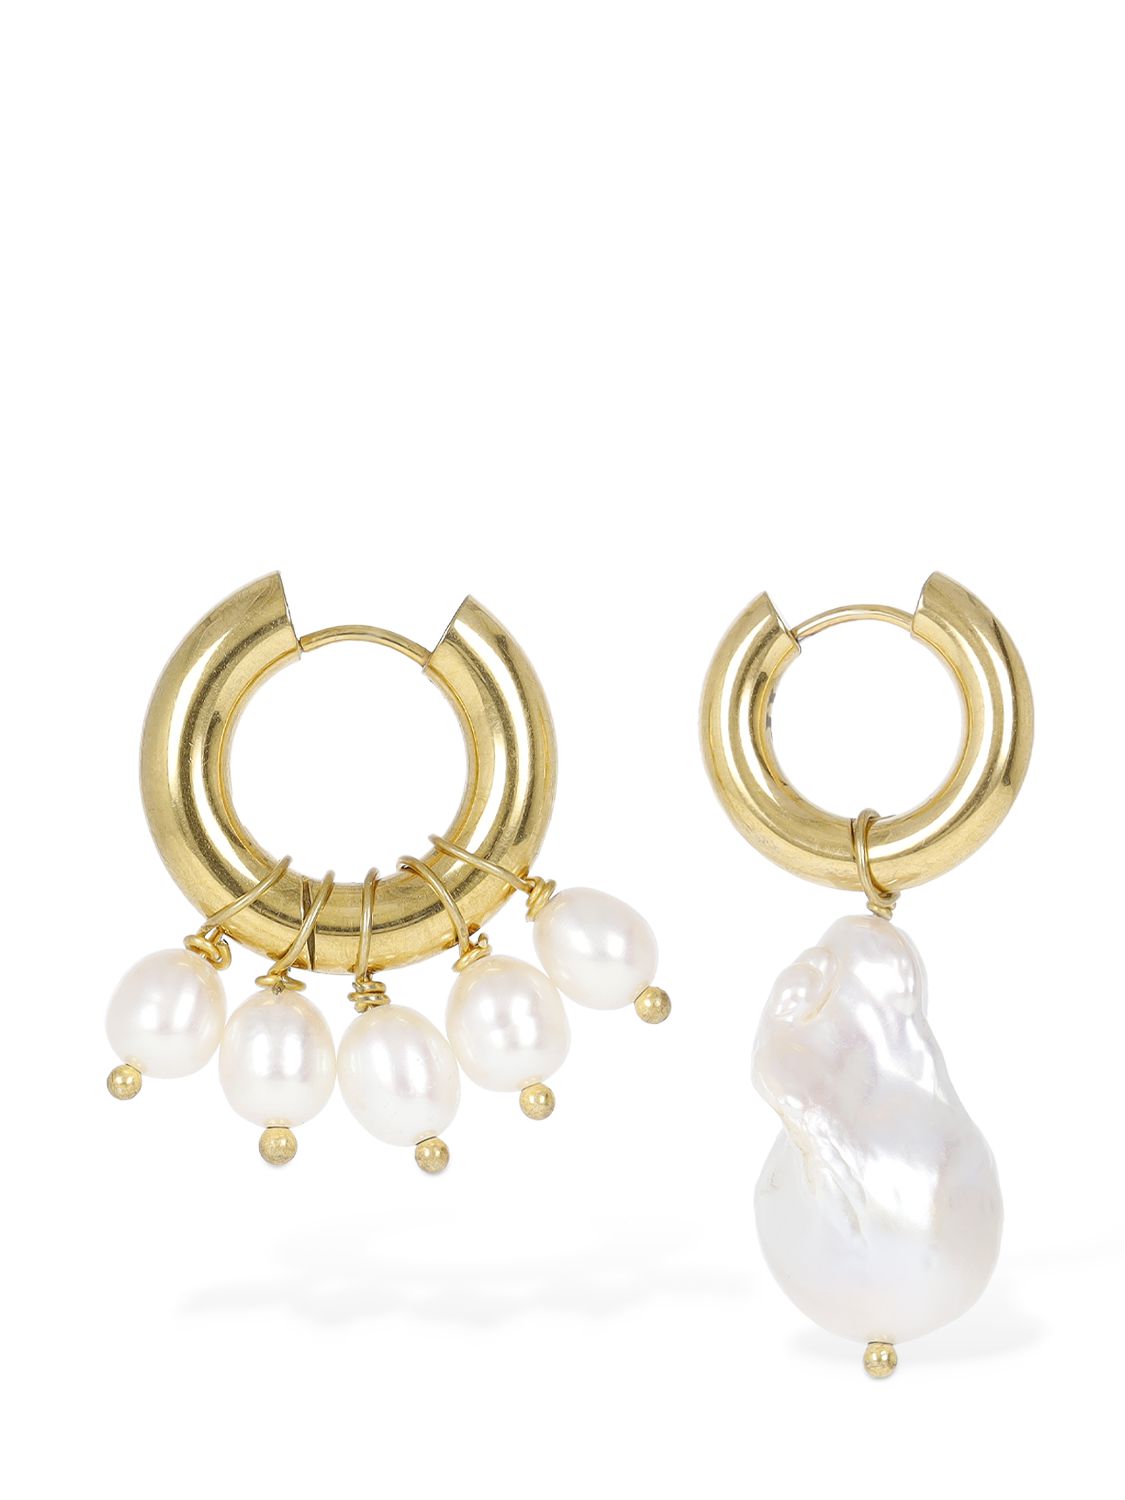 Mismatched Pearl Earrings